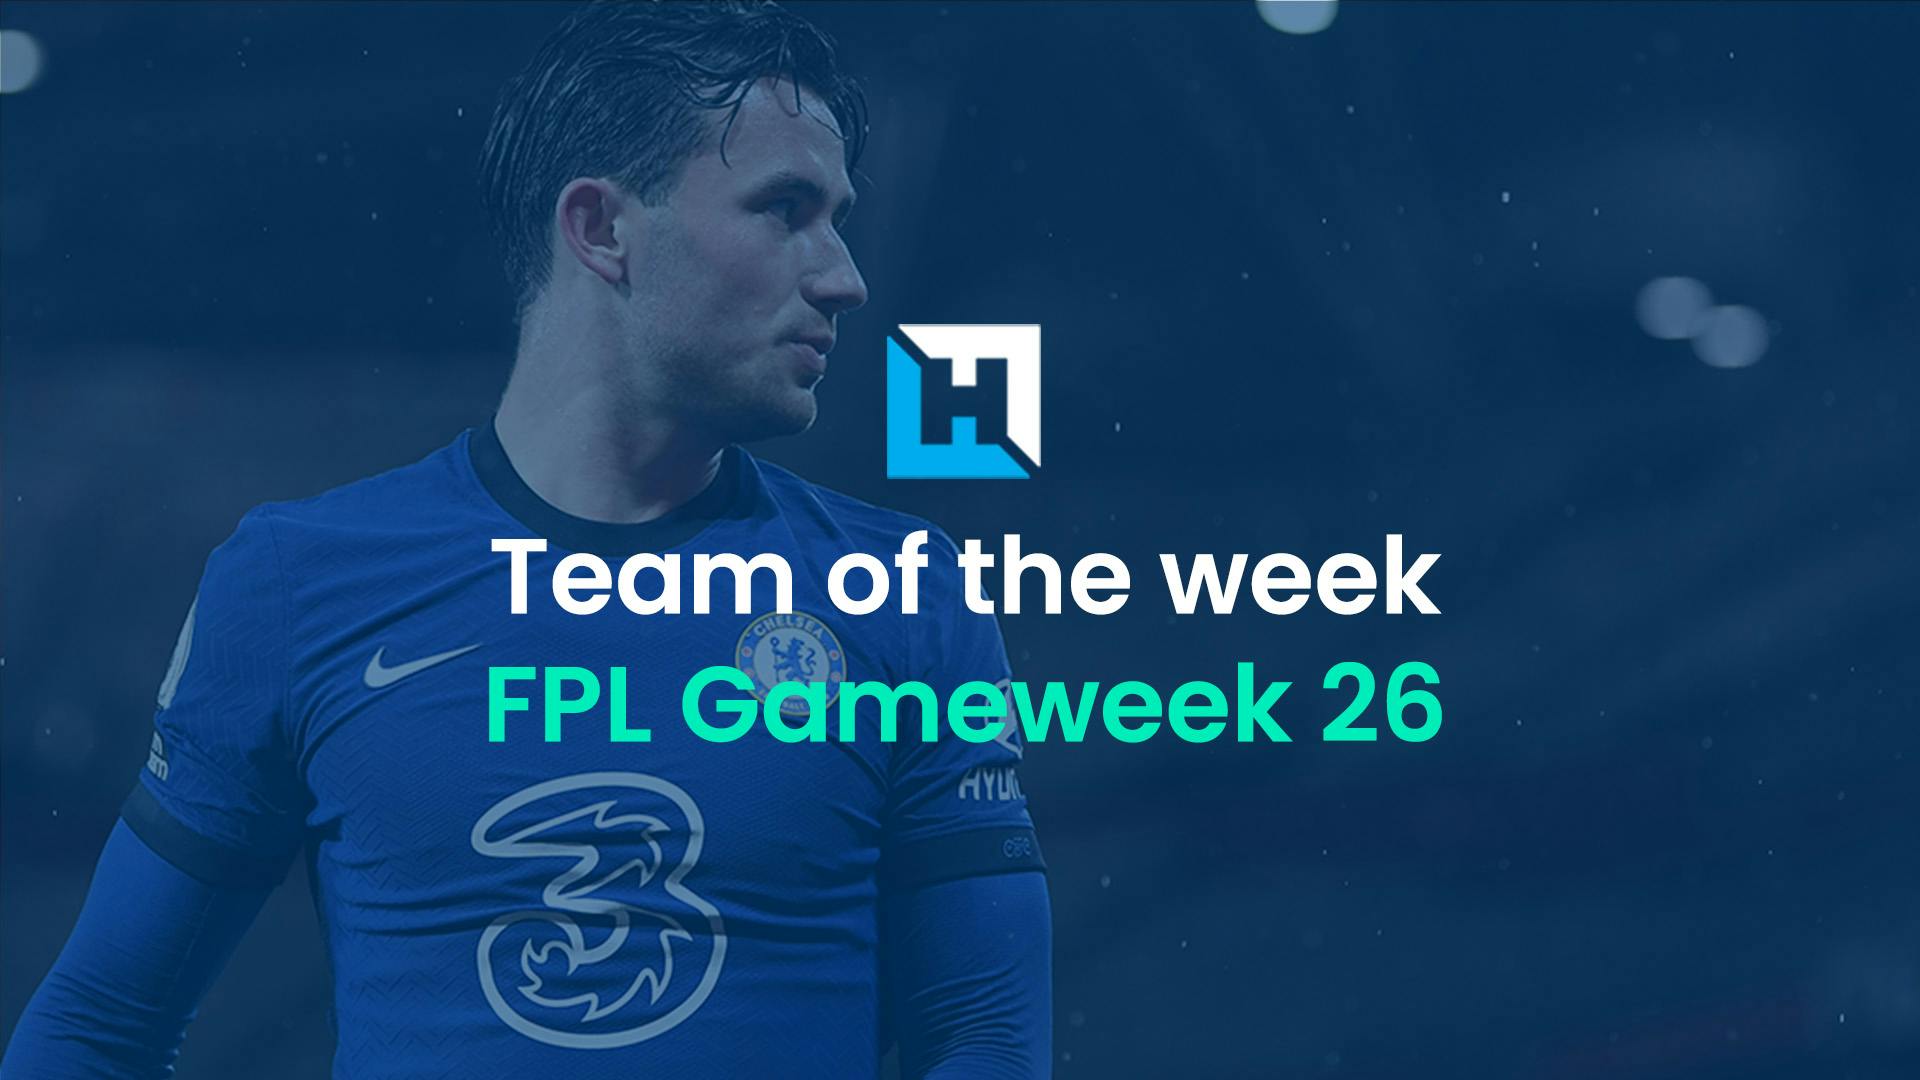 What is the best FPL team for Gameweek 26 based on predicted points?